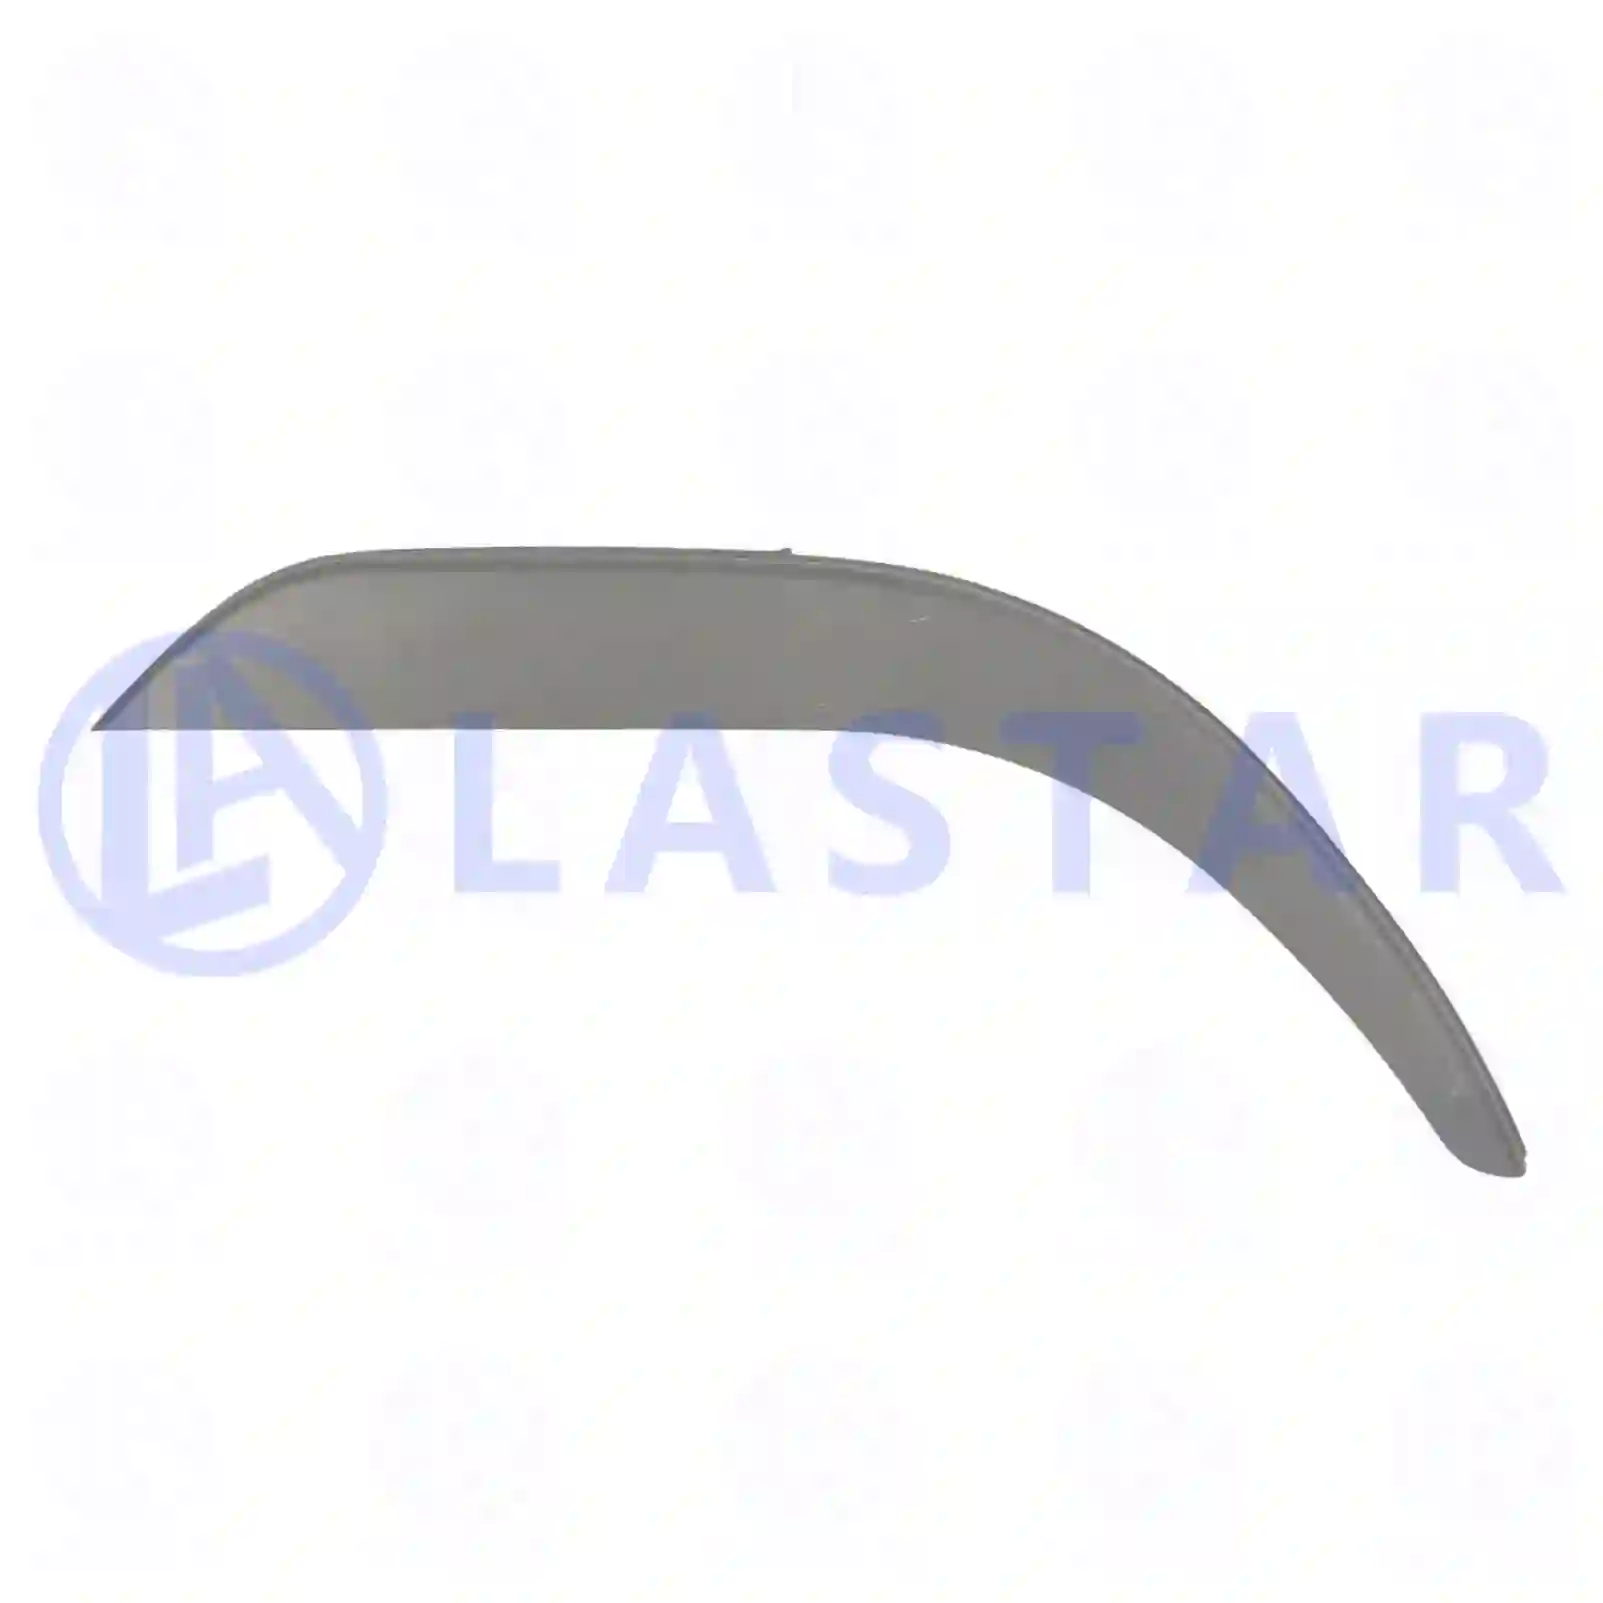 Fender widener, front, right, 77721108, 20529686, 3175938, ZG60764-0008 ||  77721108 Lastar Spare Part | Truck Spare Parts, Auotomotive Spare Parts Fender widener, front, right, 77721108, 20529686, 3175938, ZG60764-0008 ||  77721108 Lastar Spare Part | Truck Spare Parts, Auotomotive Spare Parts